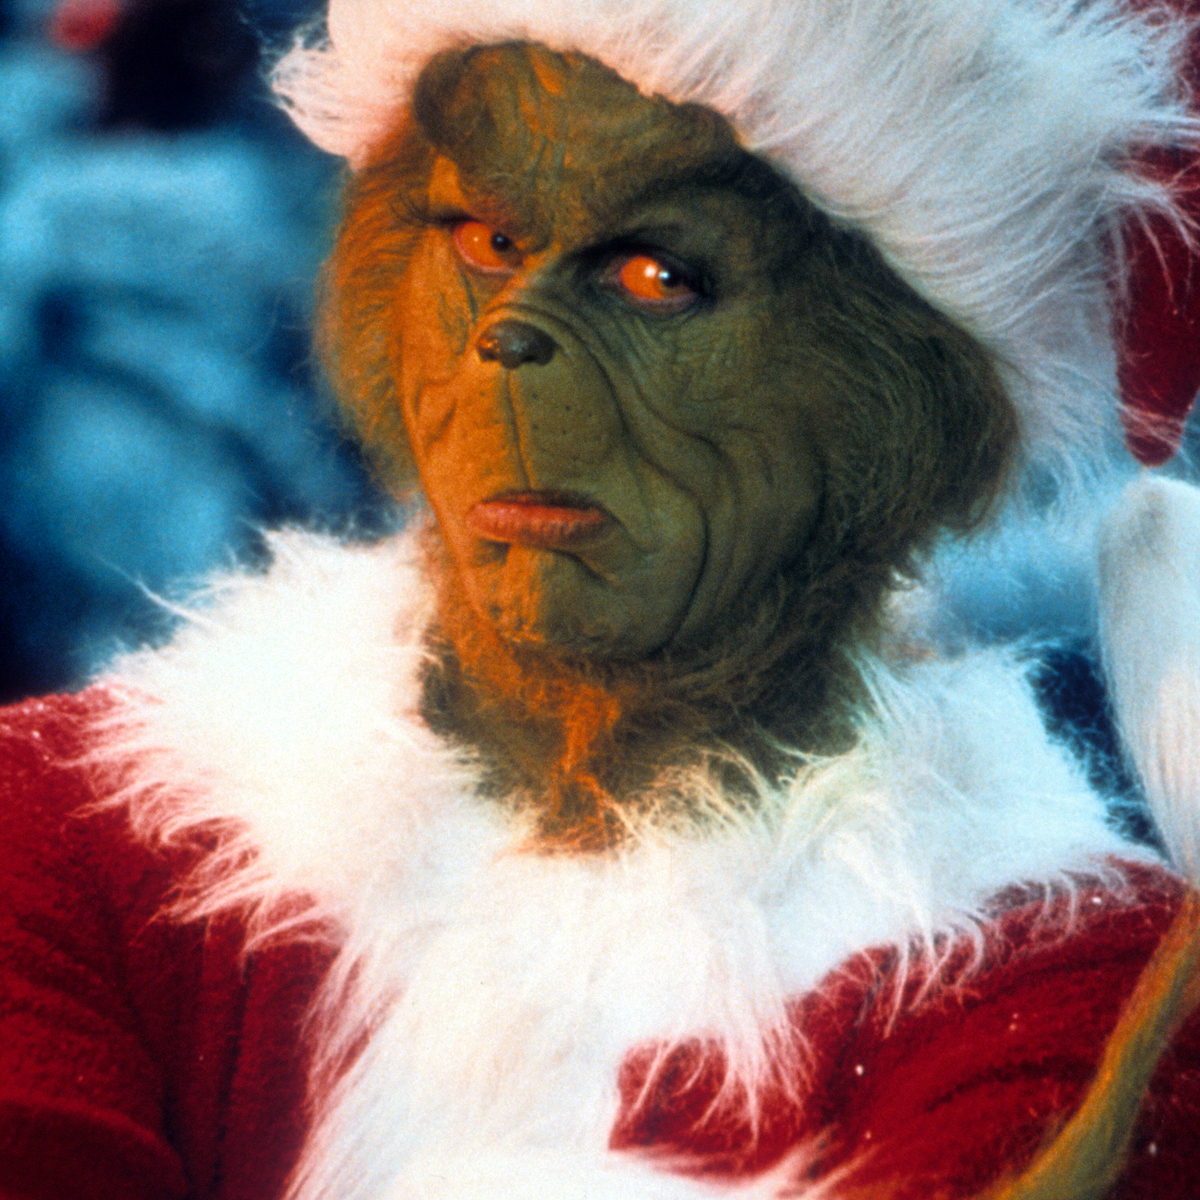 You Might’ve Missed This How the Grinch Stole Christmas Editing Error – E! Online